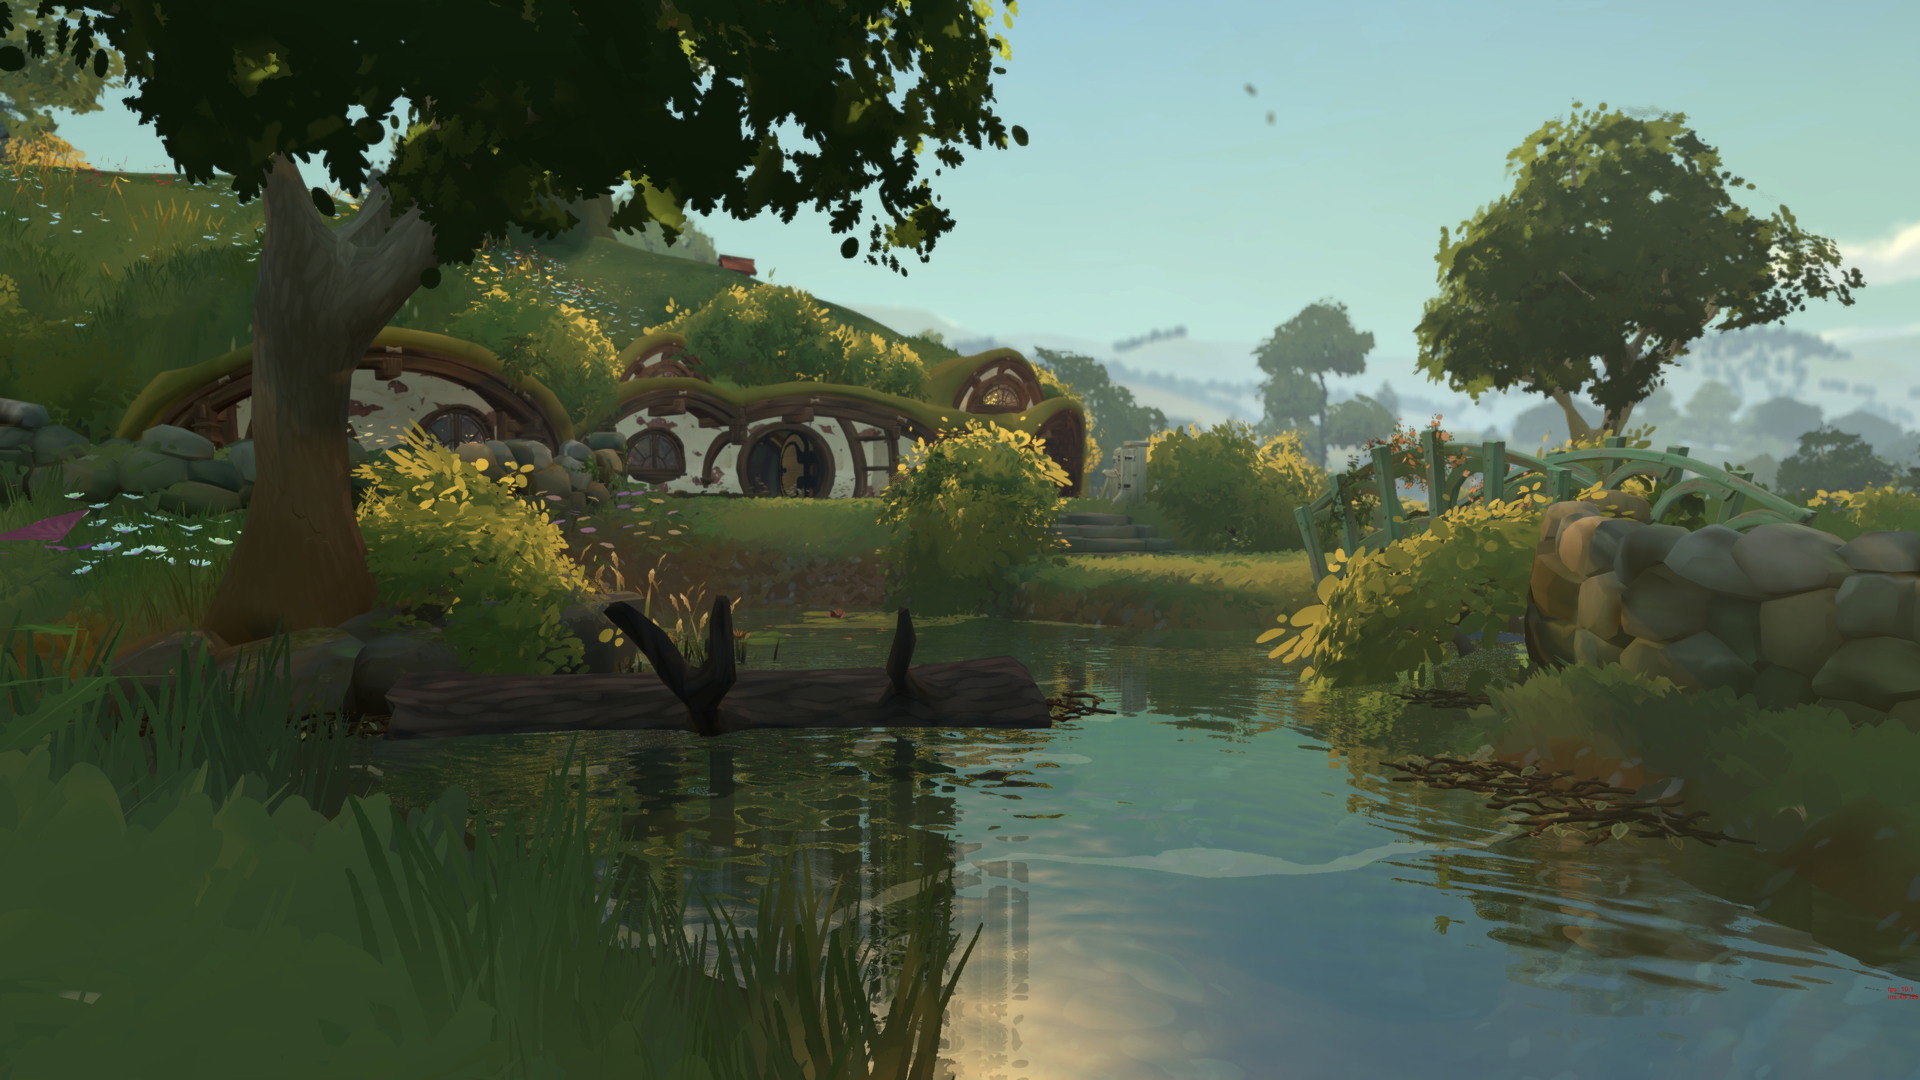 Tales of the Shire: A The Lord of The Rings Game - screenshot 4